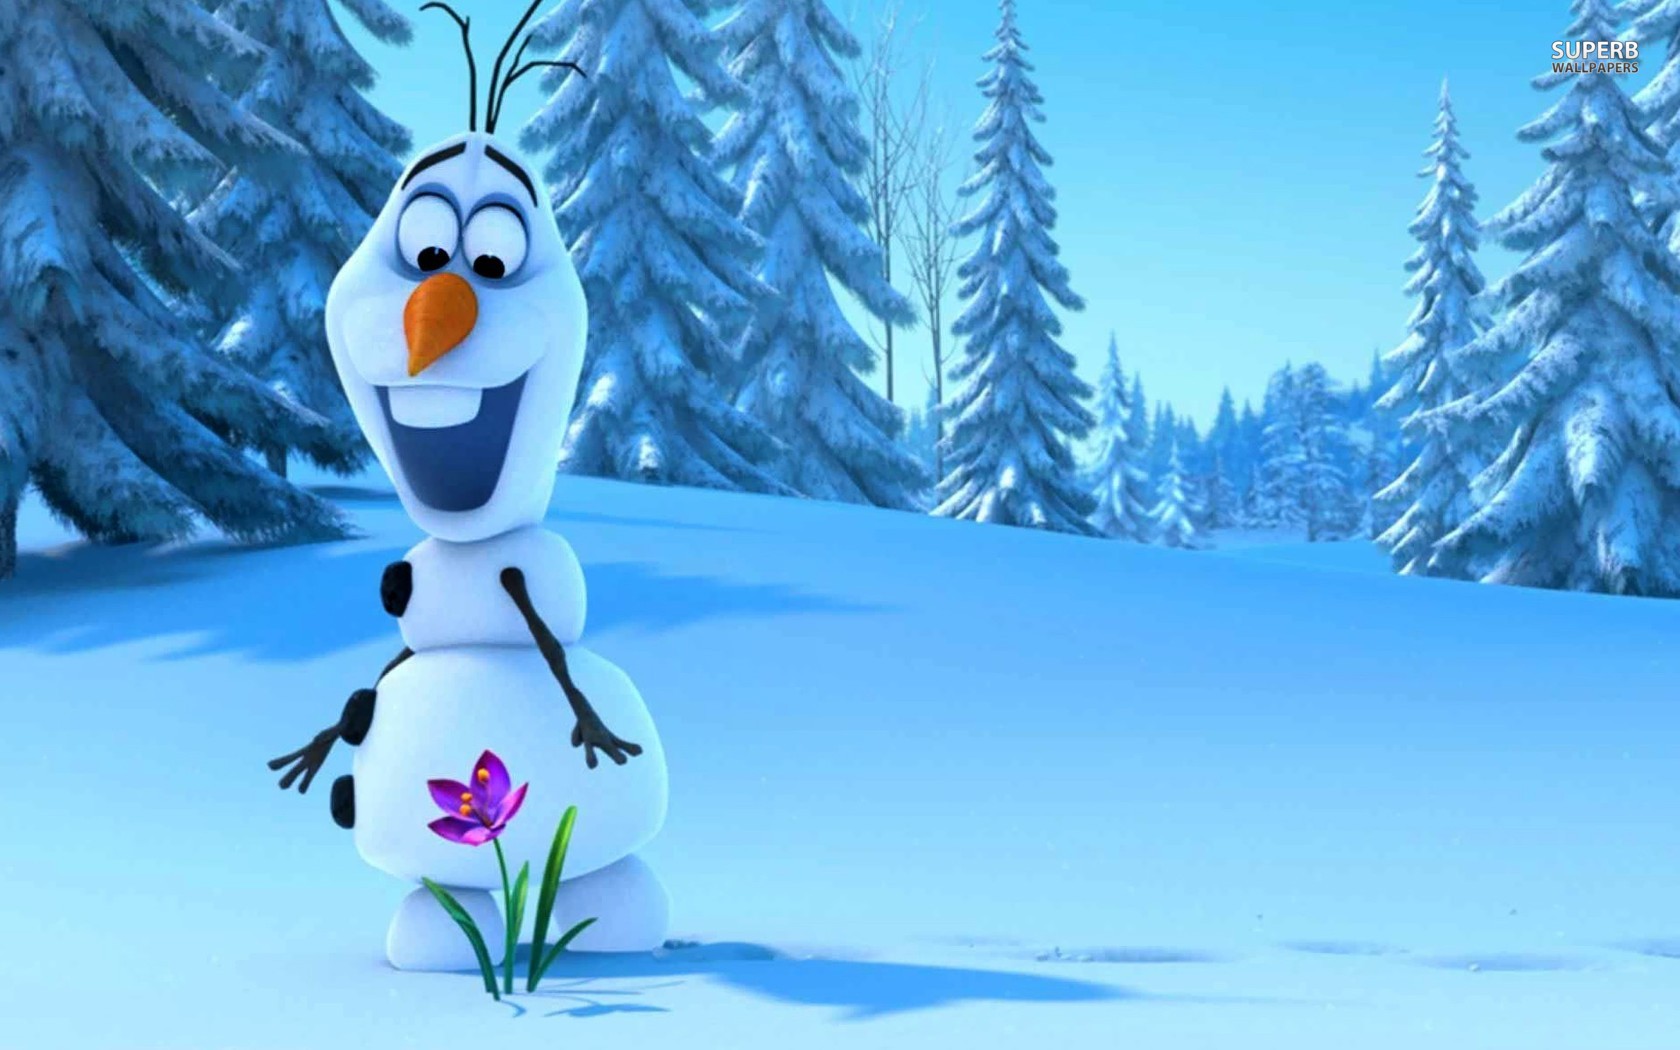 You Can Olaf Frozen Wallpaper In Your Puter By Clicking